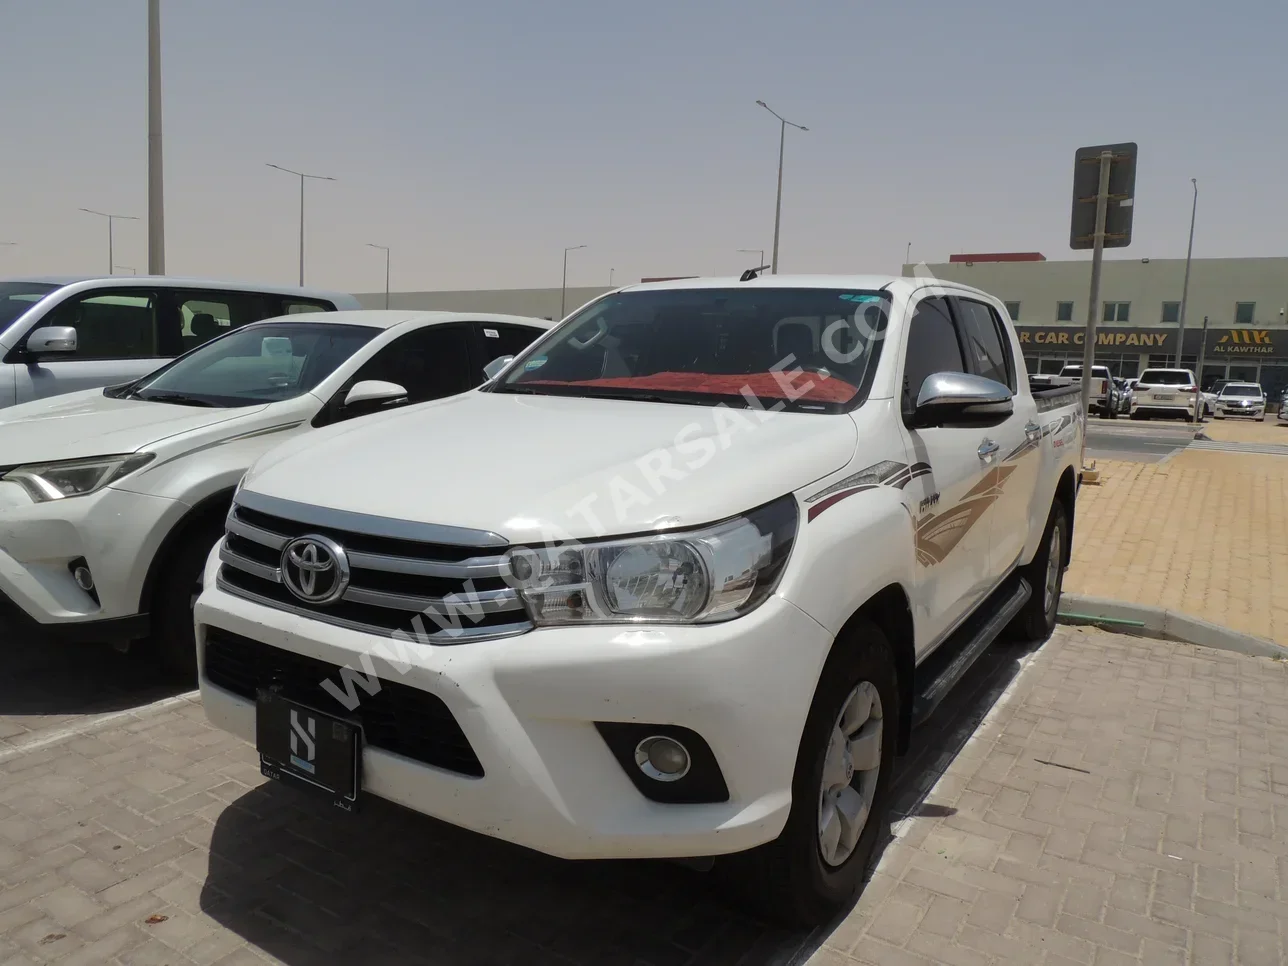 Toyota  Hilux  SR5  2017  Manual  190,000 Km  4 Cylinder  Four Wheel Drive (4WD)  Pick Up  White